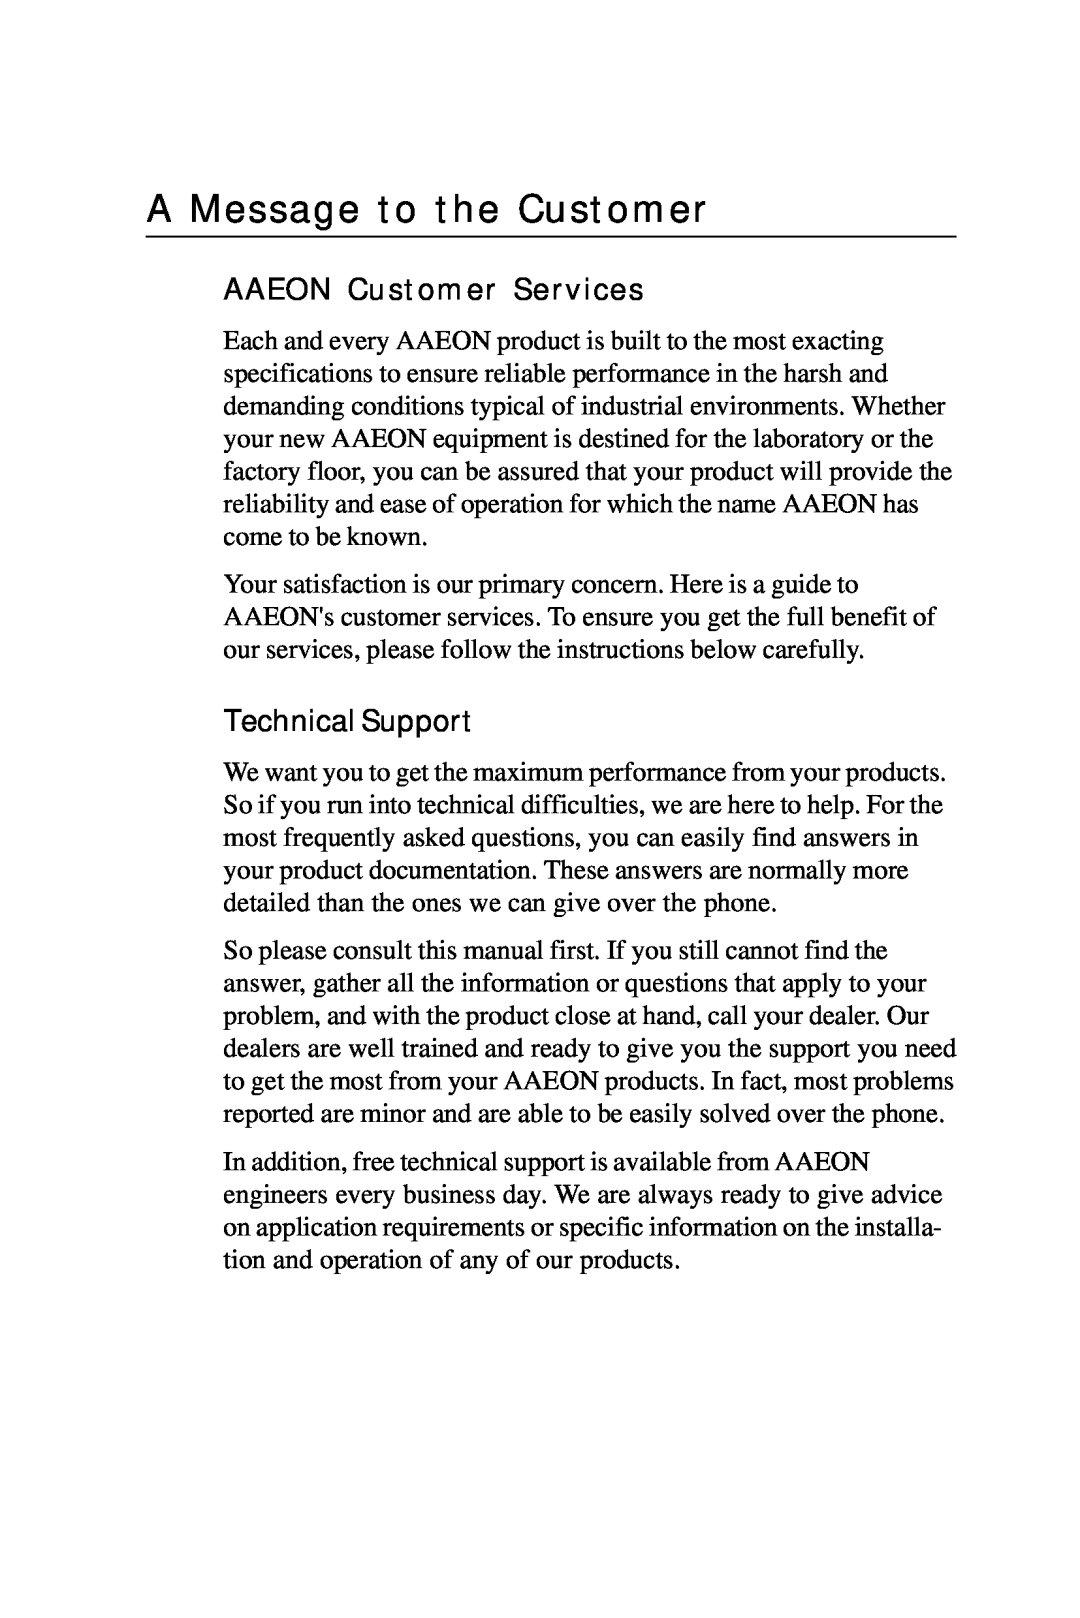 Intel PCM-6896 manual A Message to the Customer, AAEON Customer Services, Technical Support 